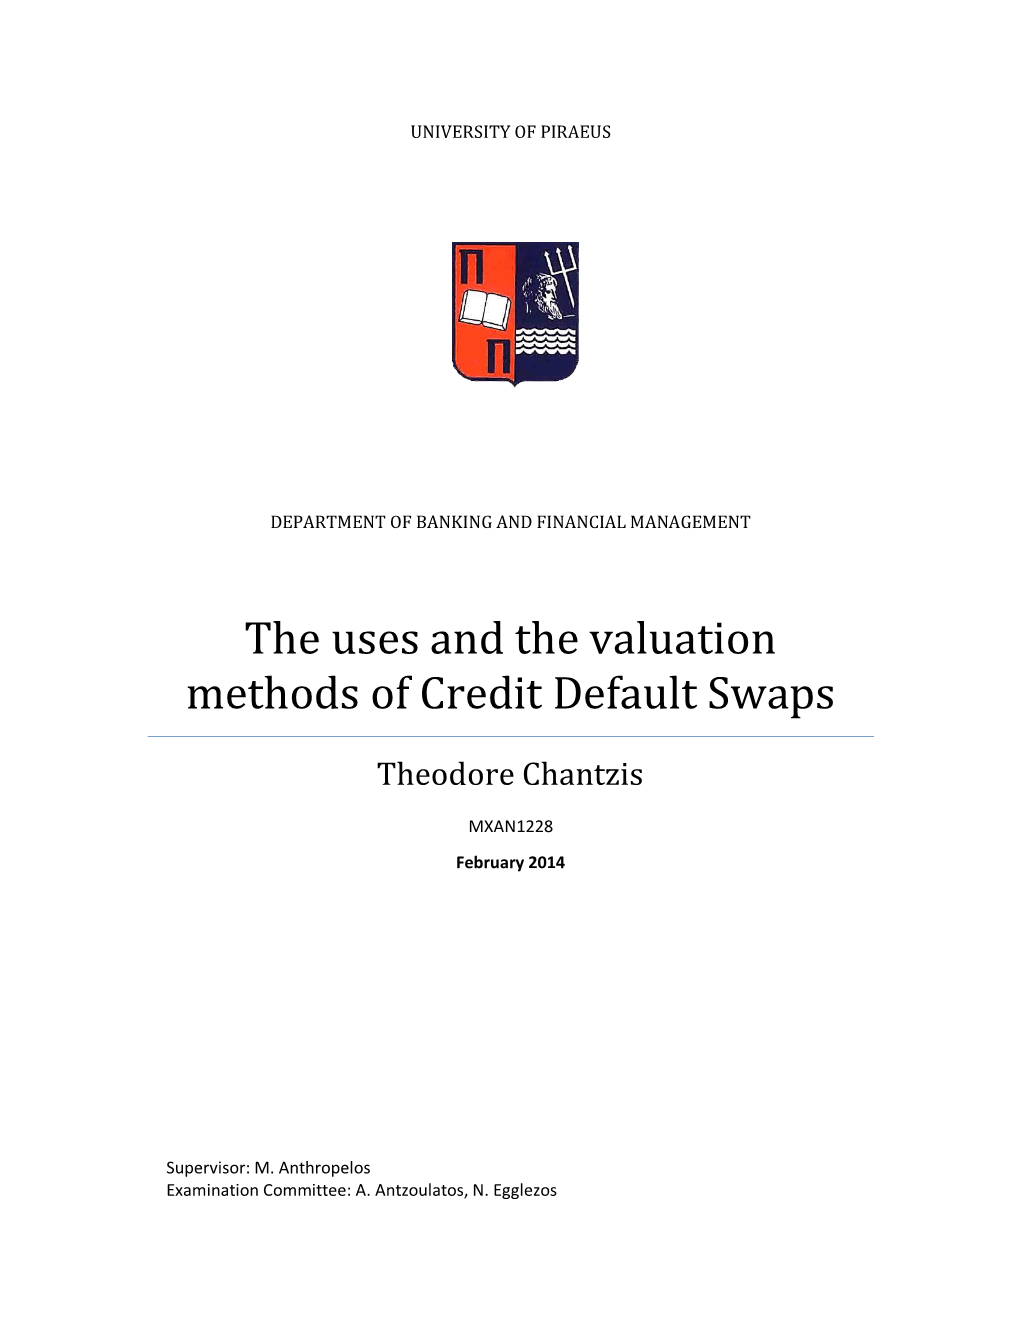 The Uses and the Valuation Methods of Credit Default Swaps